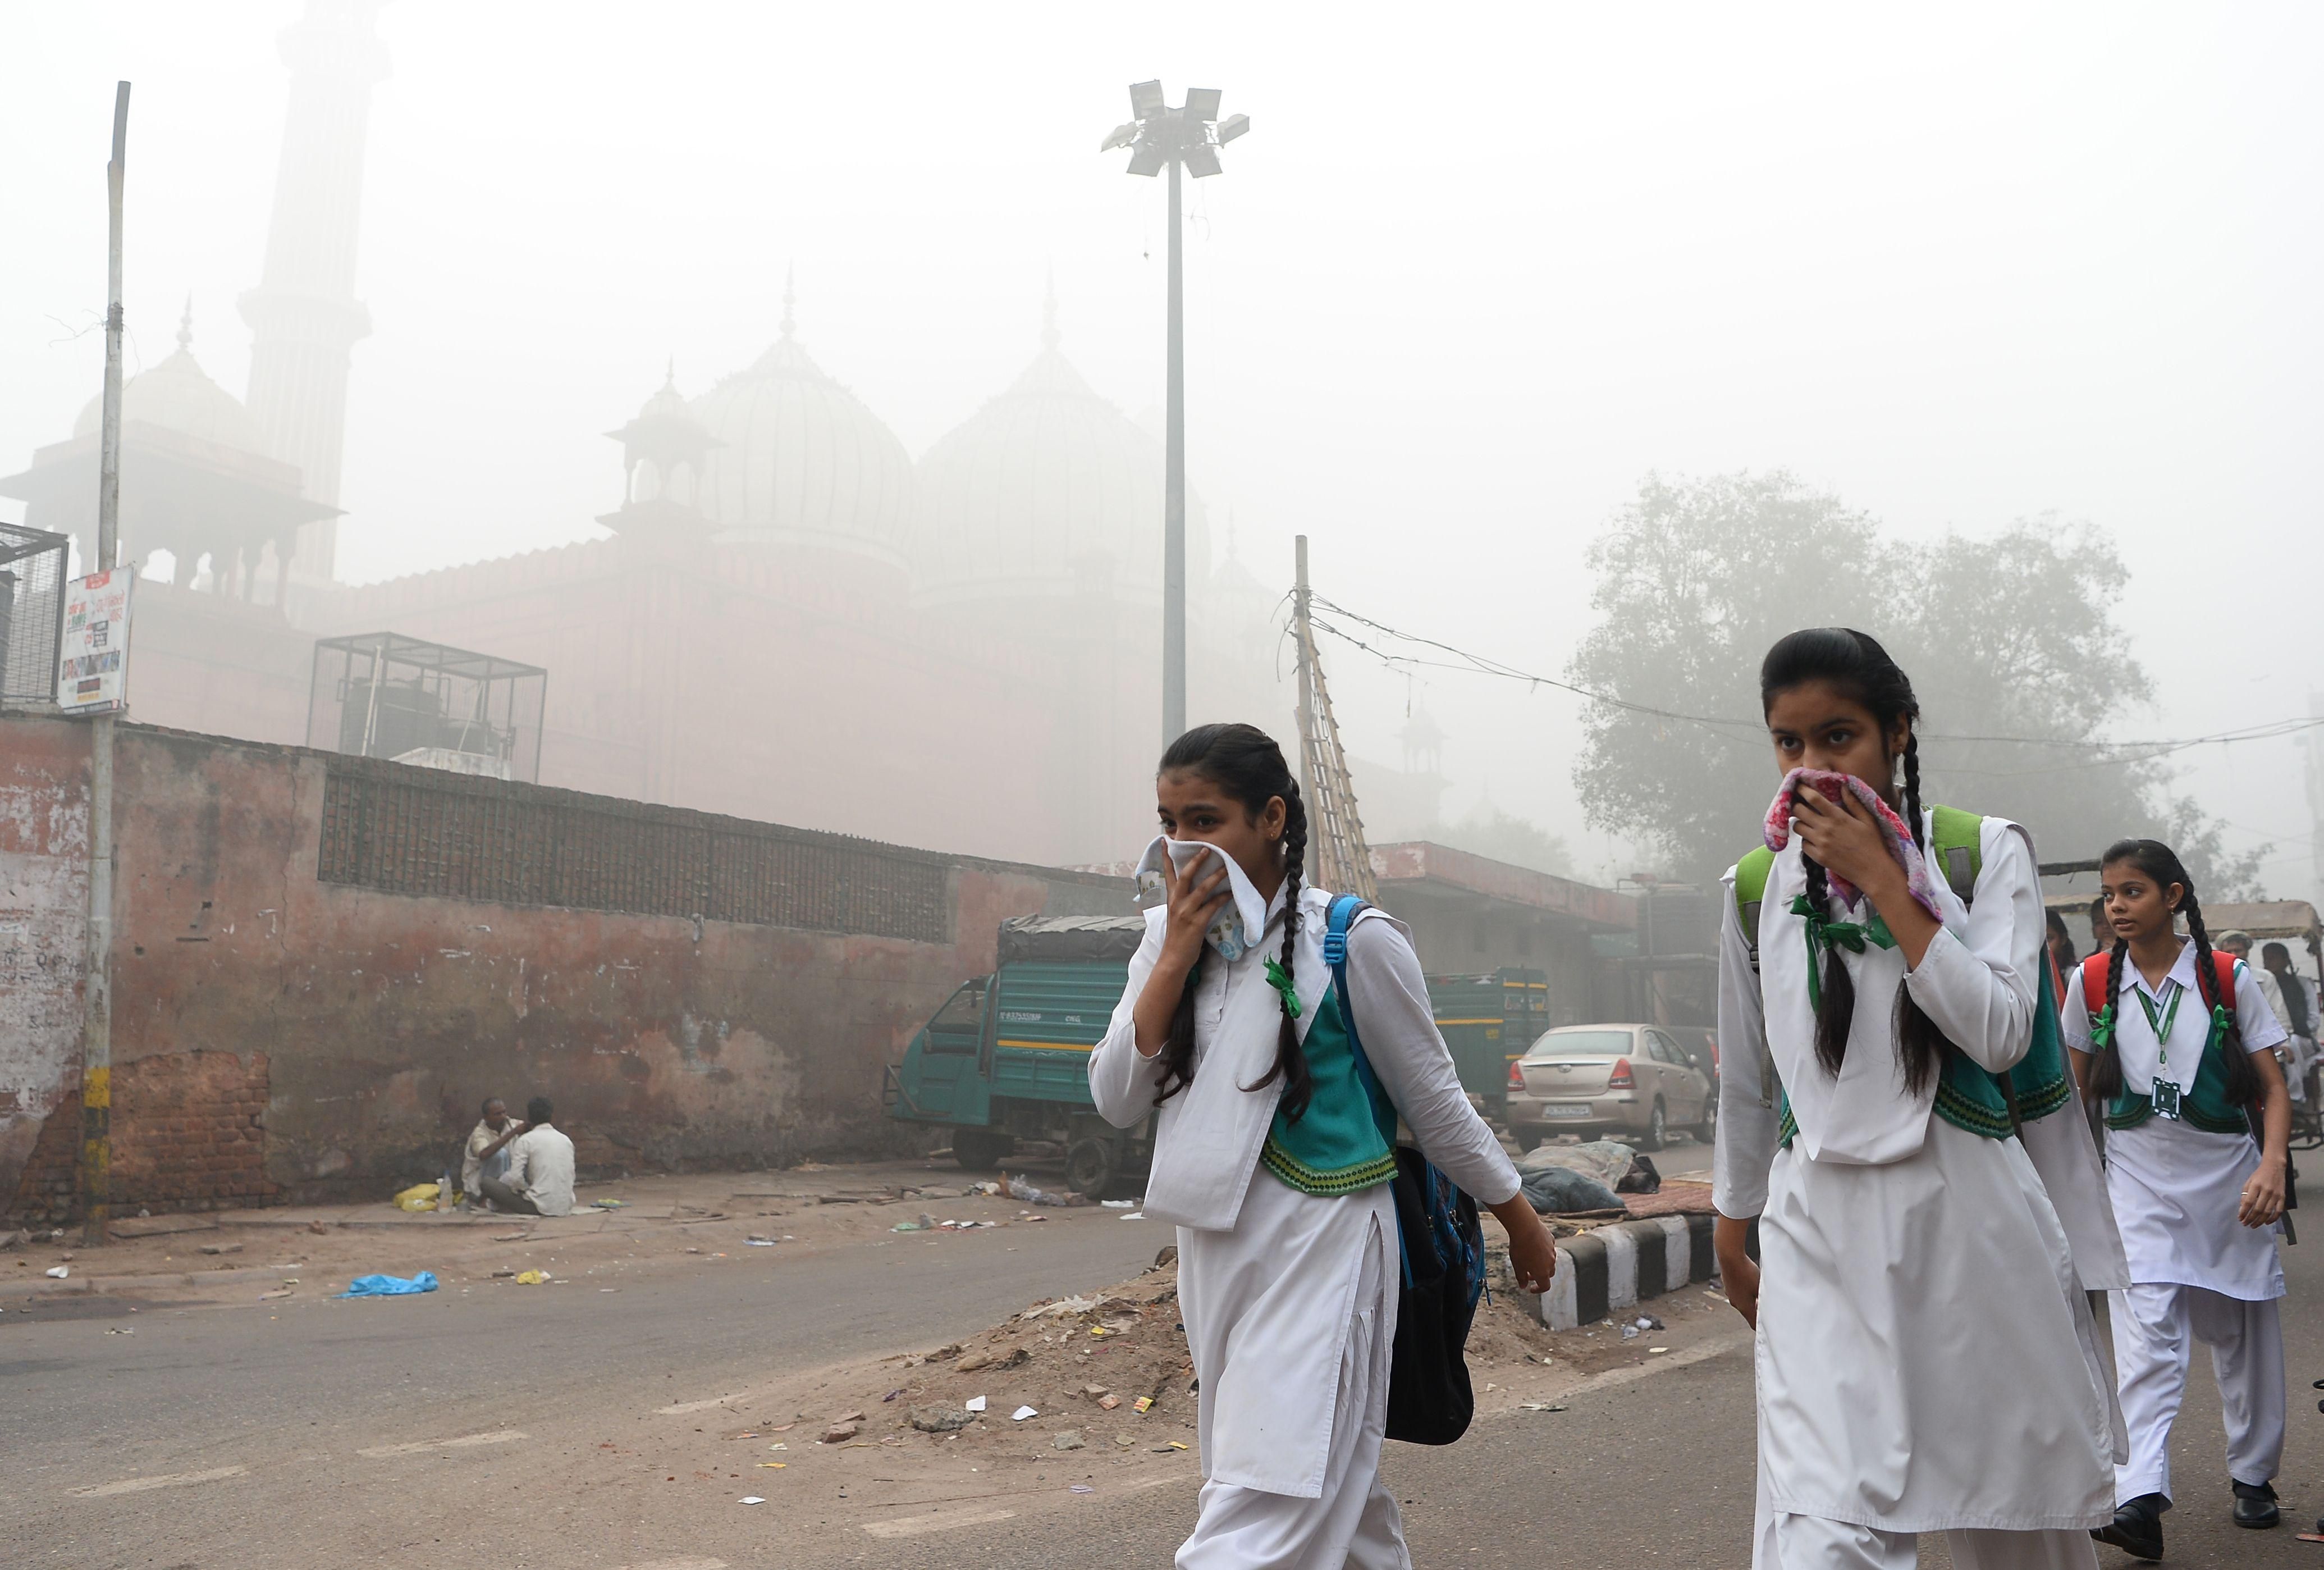 Indian students cover their faces as they walk to school amid heavy smog in New Delhi on November 8, 2017